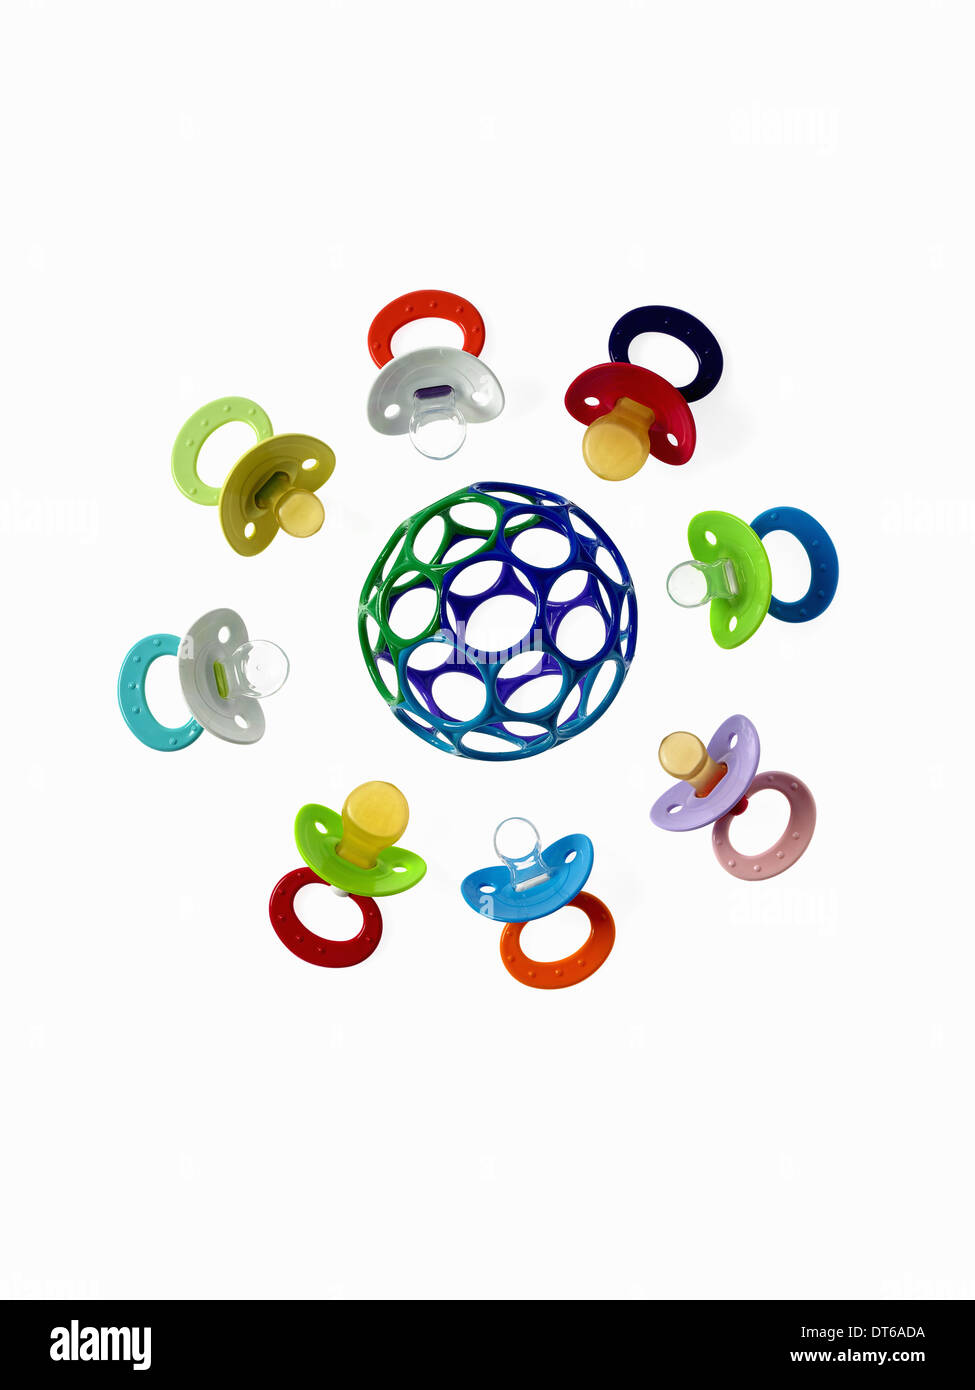 Coloured plastic baby pacifiers, dummies or soothers. Stock Photo